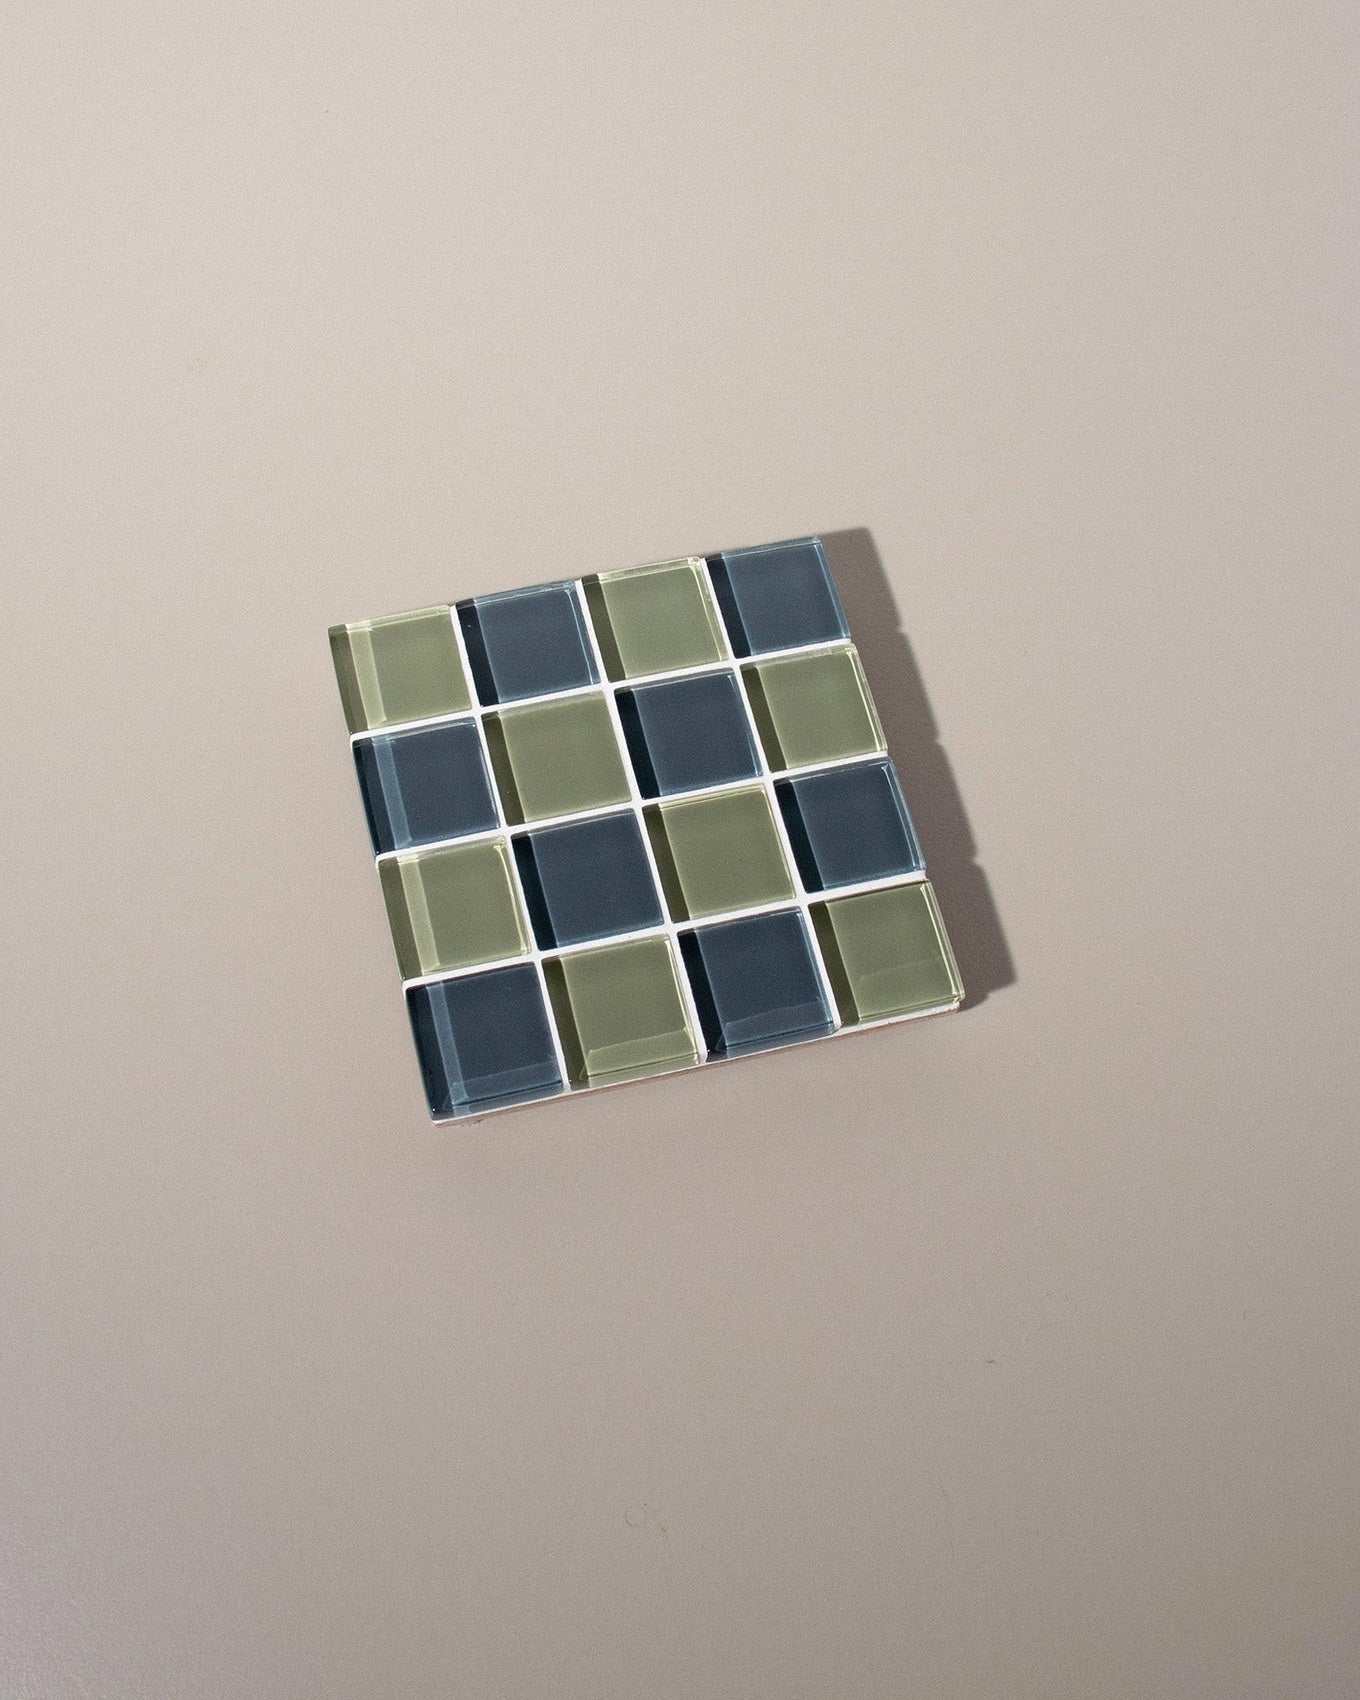 Glass Tile Coaster in Dusted Moss